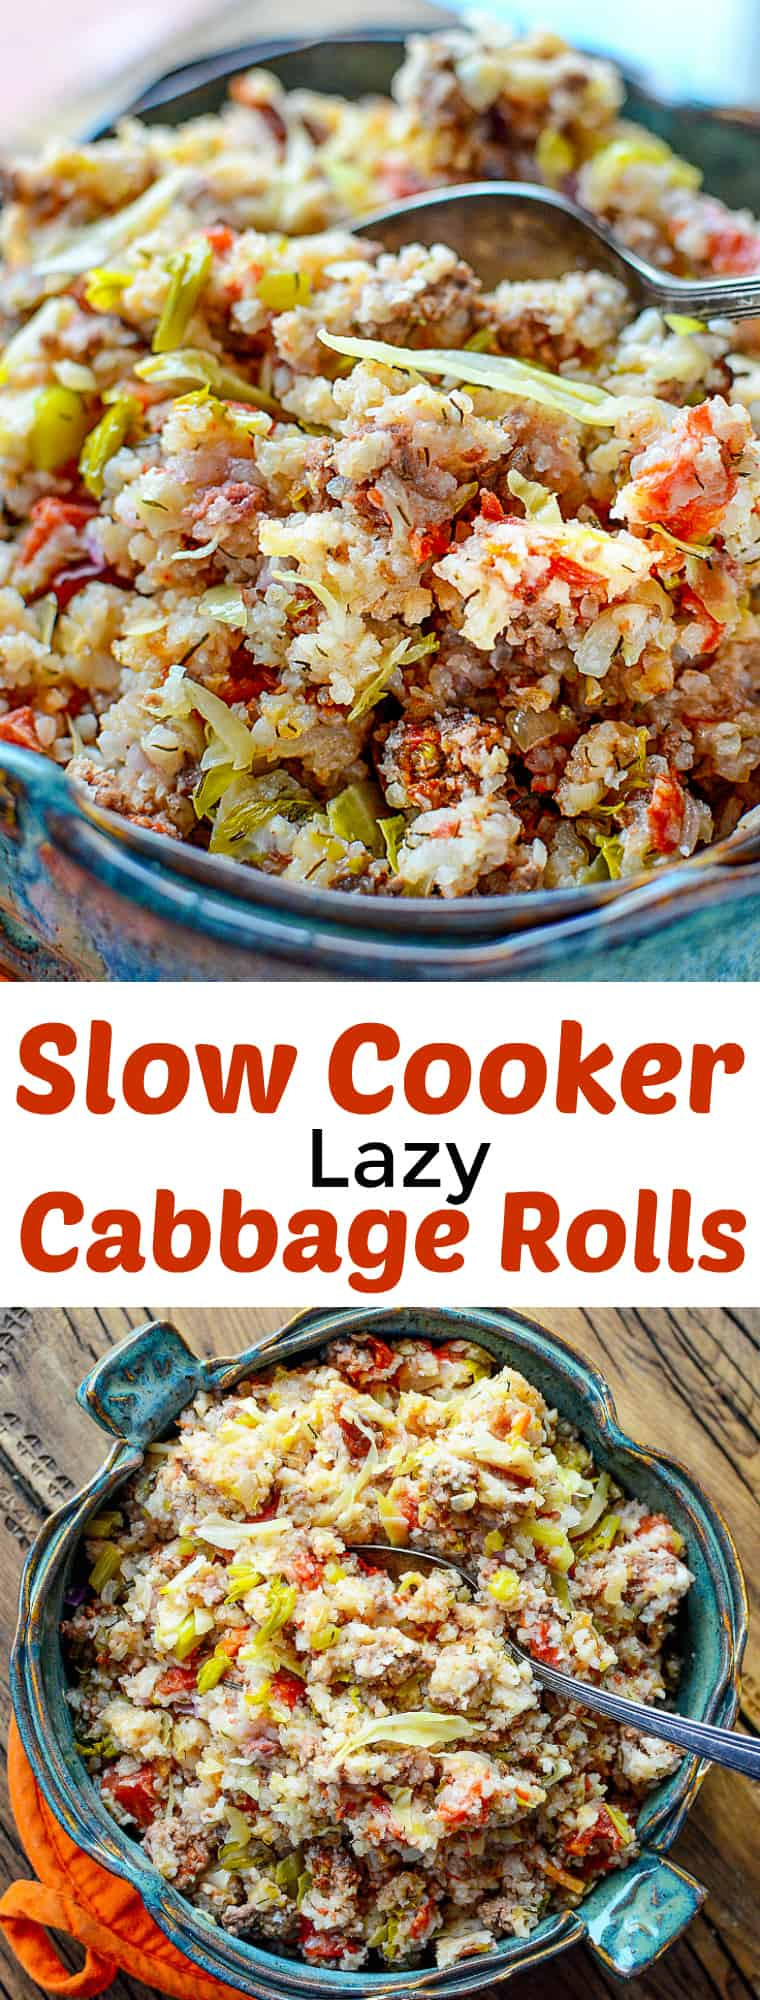 Slow Cooker Cabbage Recipes
 Slow Cooker Lazy Cabbage Rolls